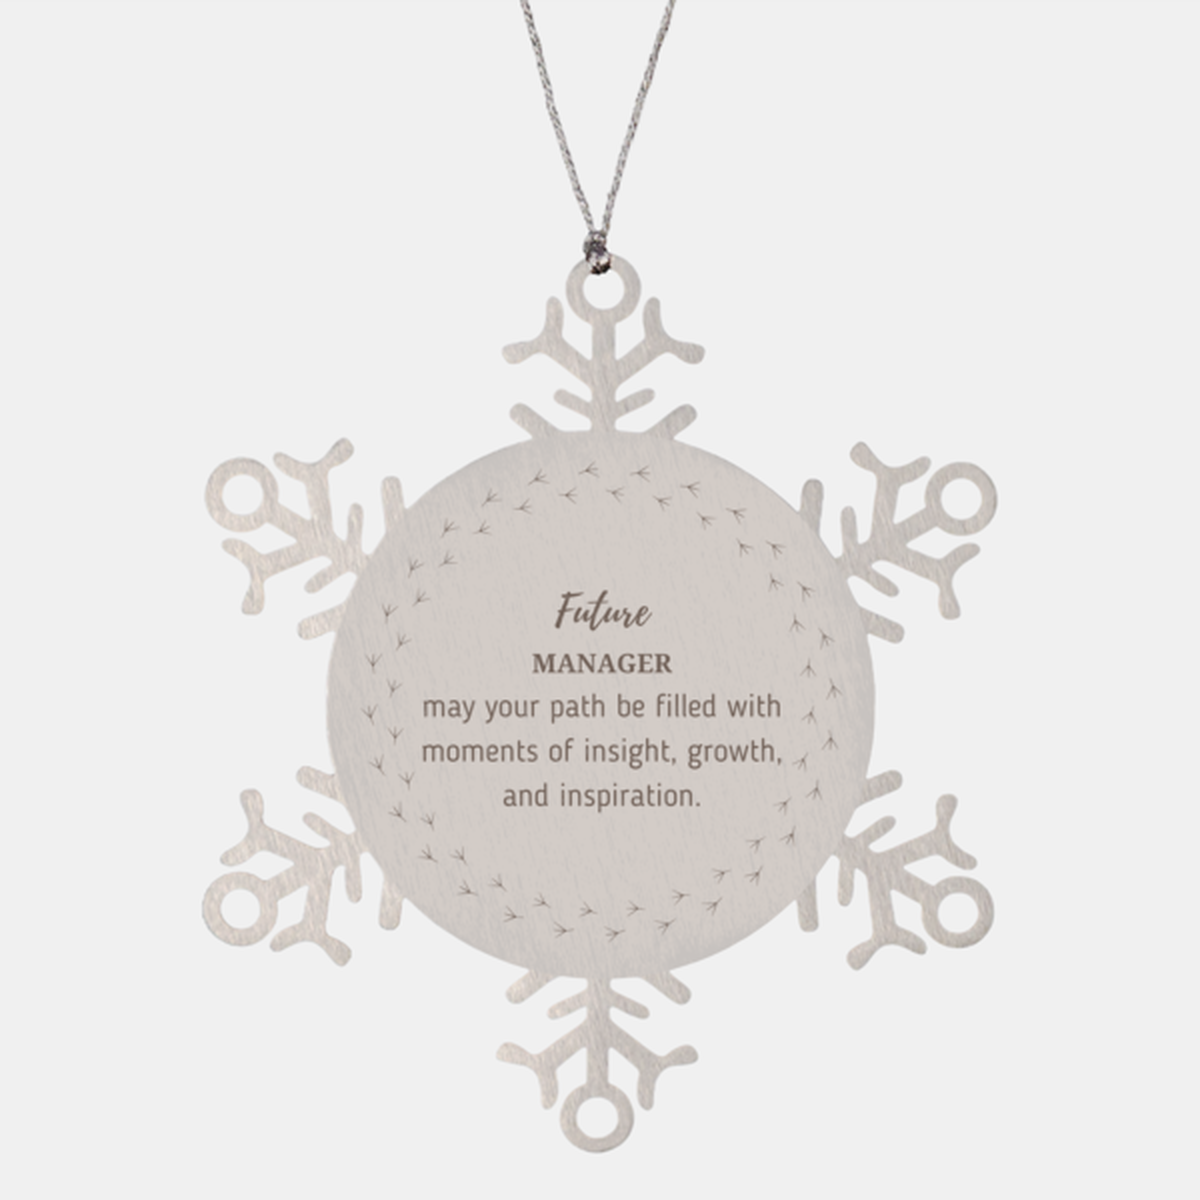 Future Manager Gifts, May your path be filled with moments of insight, Graduation Gifts for New Manager, Christmas Unique Snowflake Ornament For Men, Women, Friends